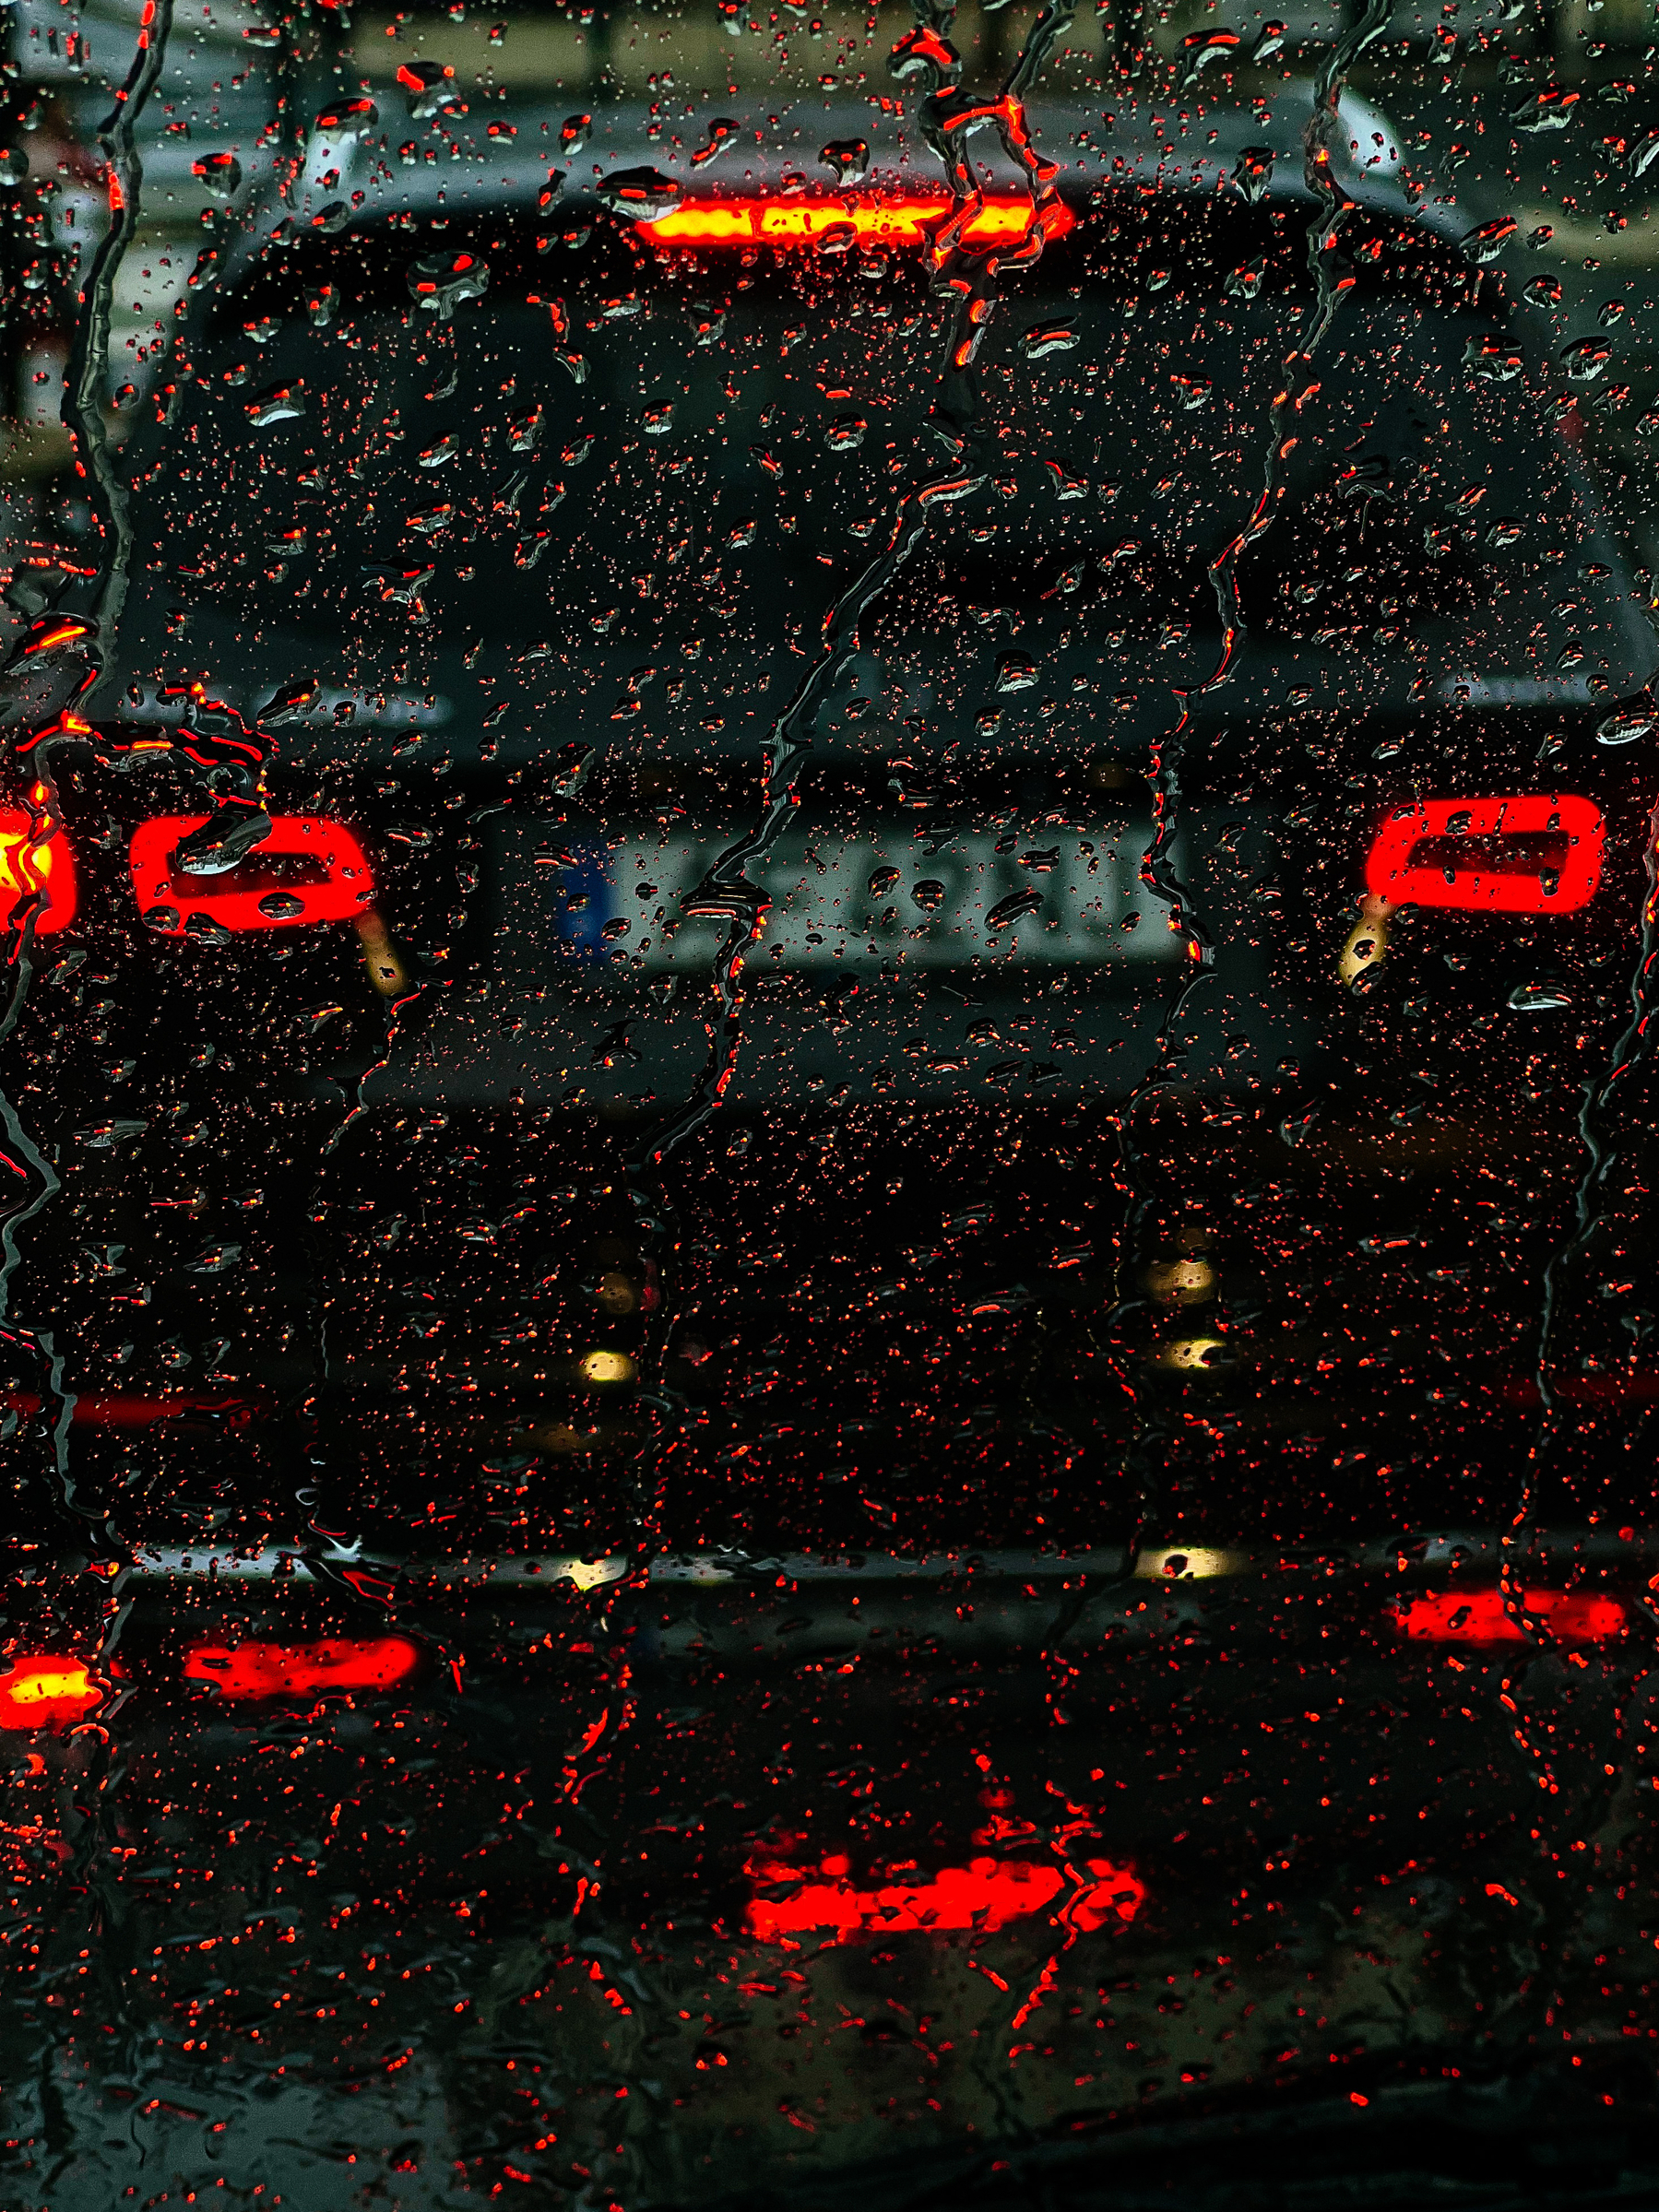 raindrops on a windshield, with red light coming from the stopped car just in front of us